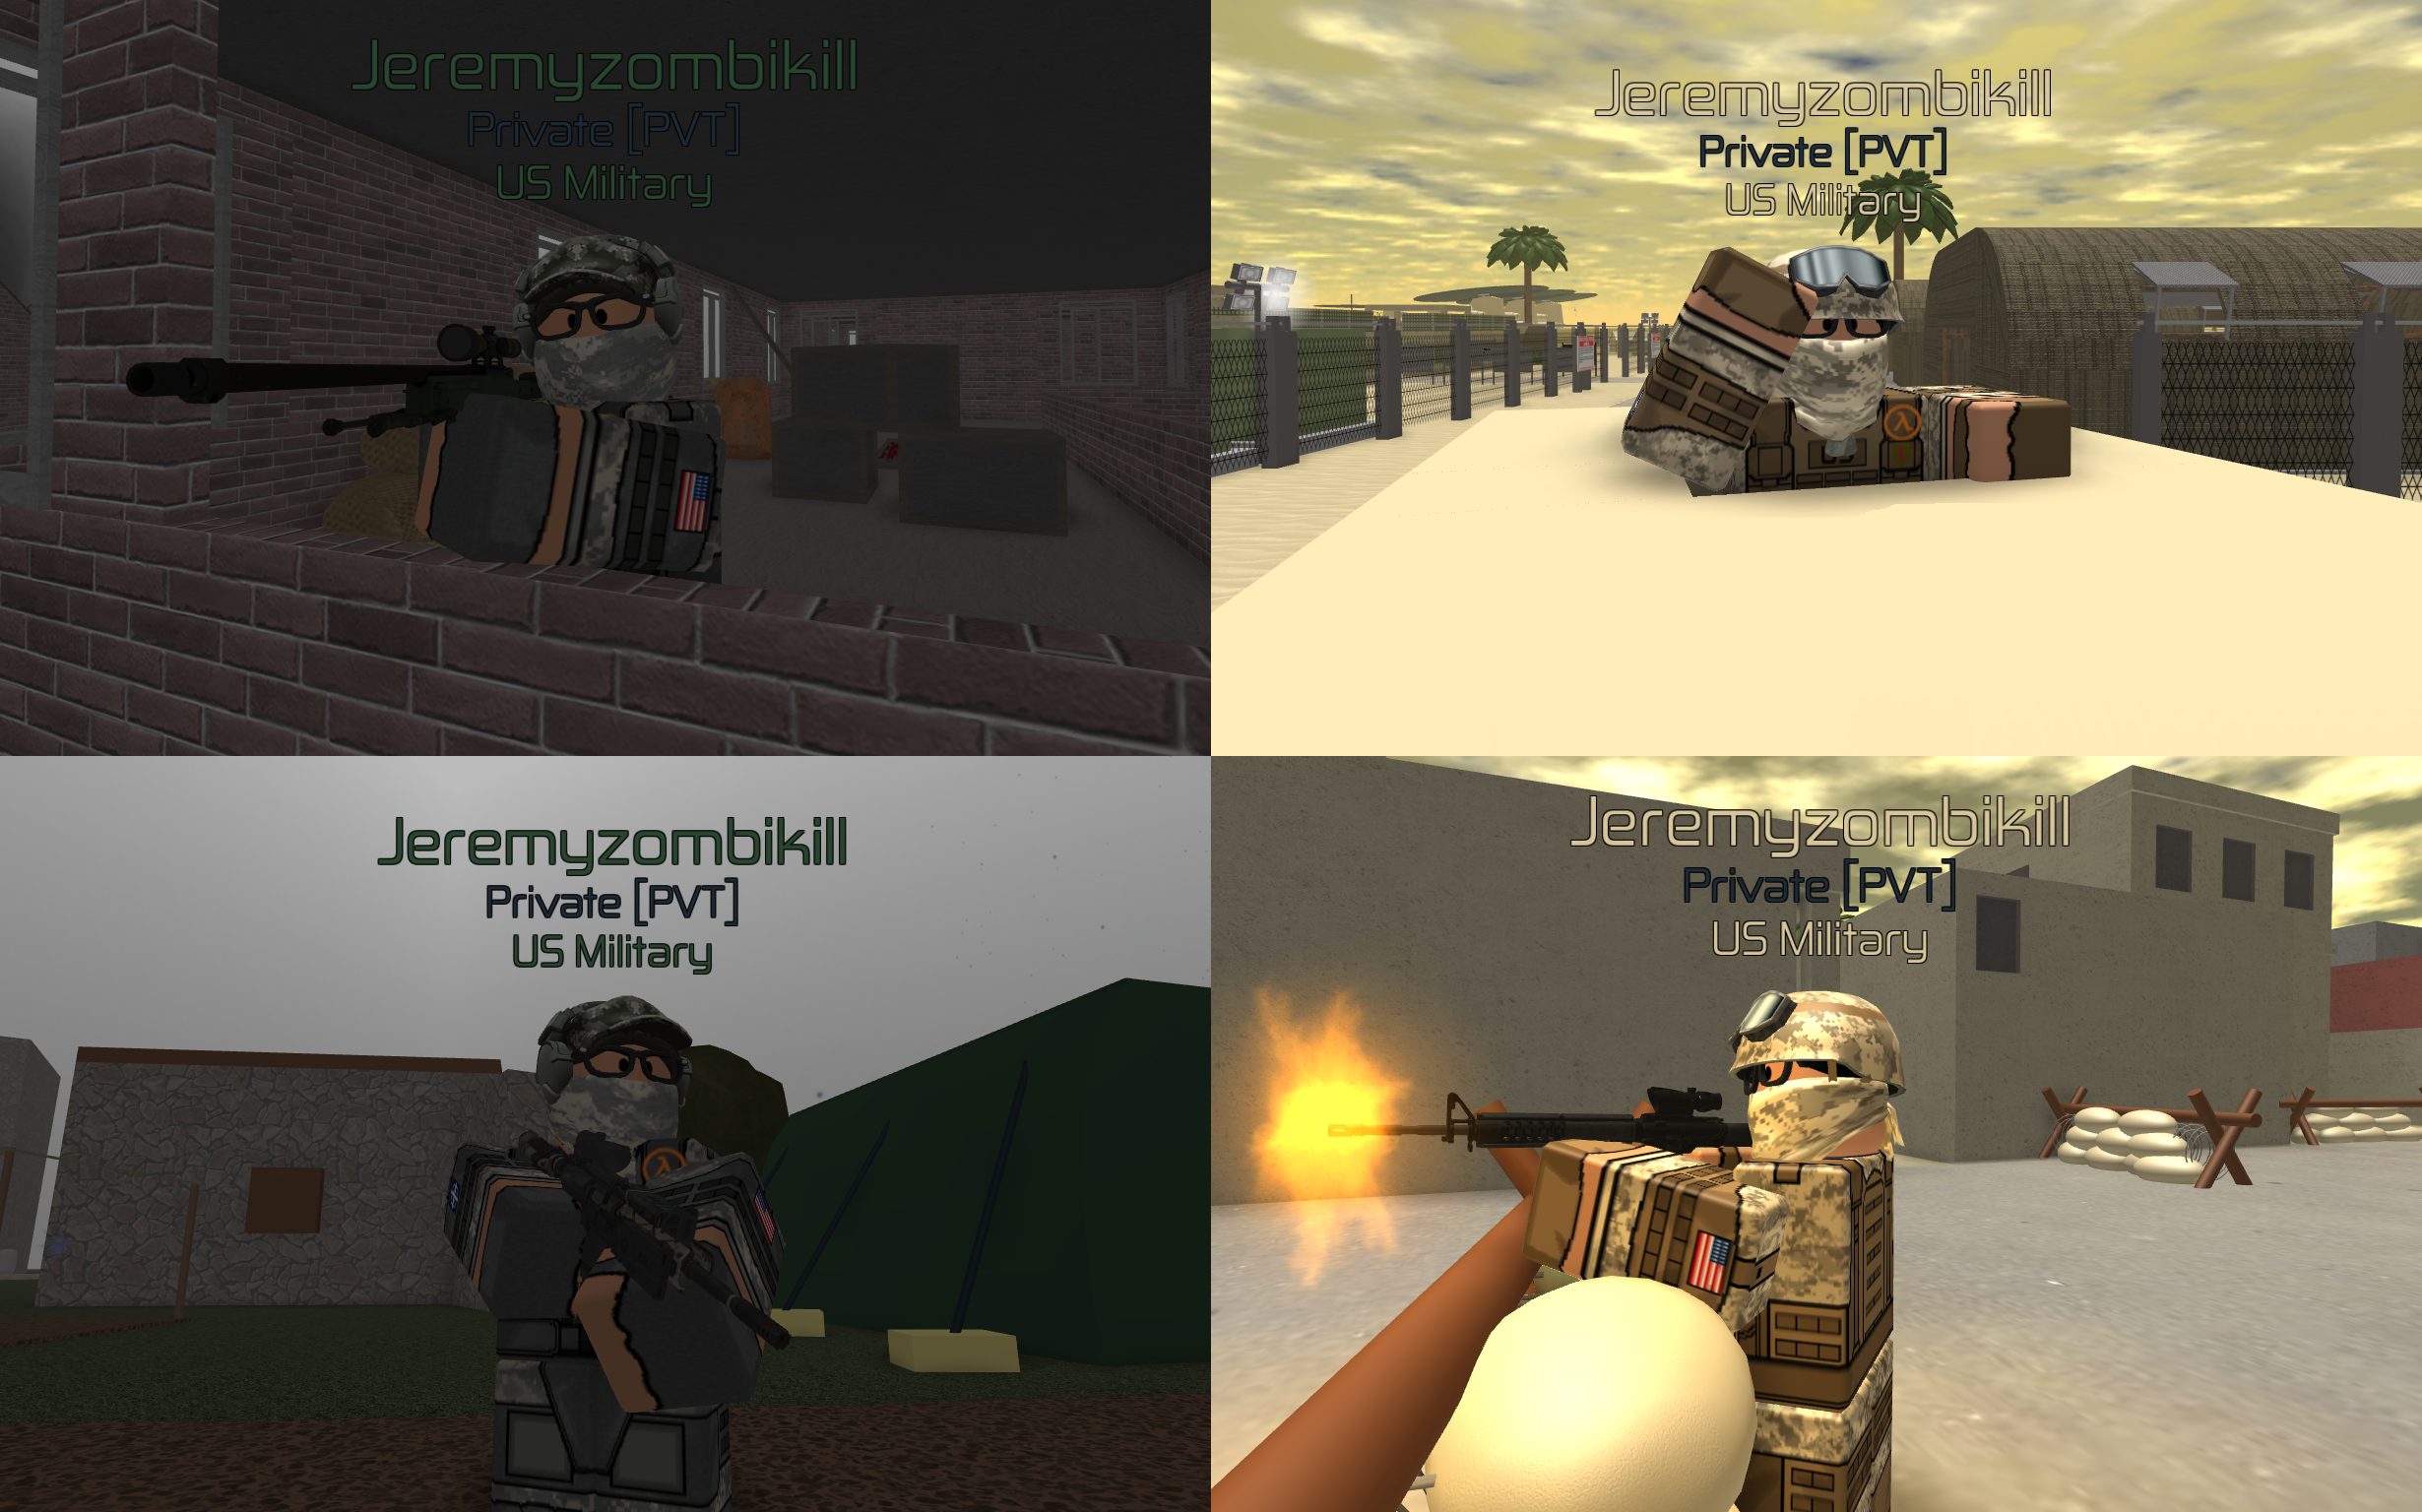 Roblox Z Kill In The U S Military By Jeremyzombikill On Deviantart - good military games on roblox